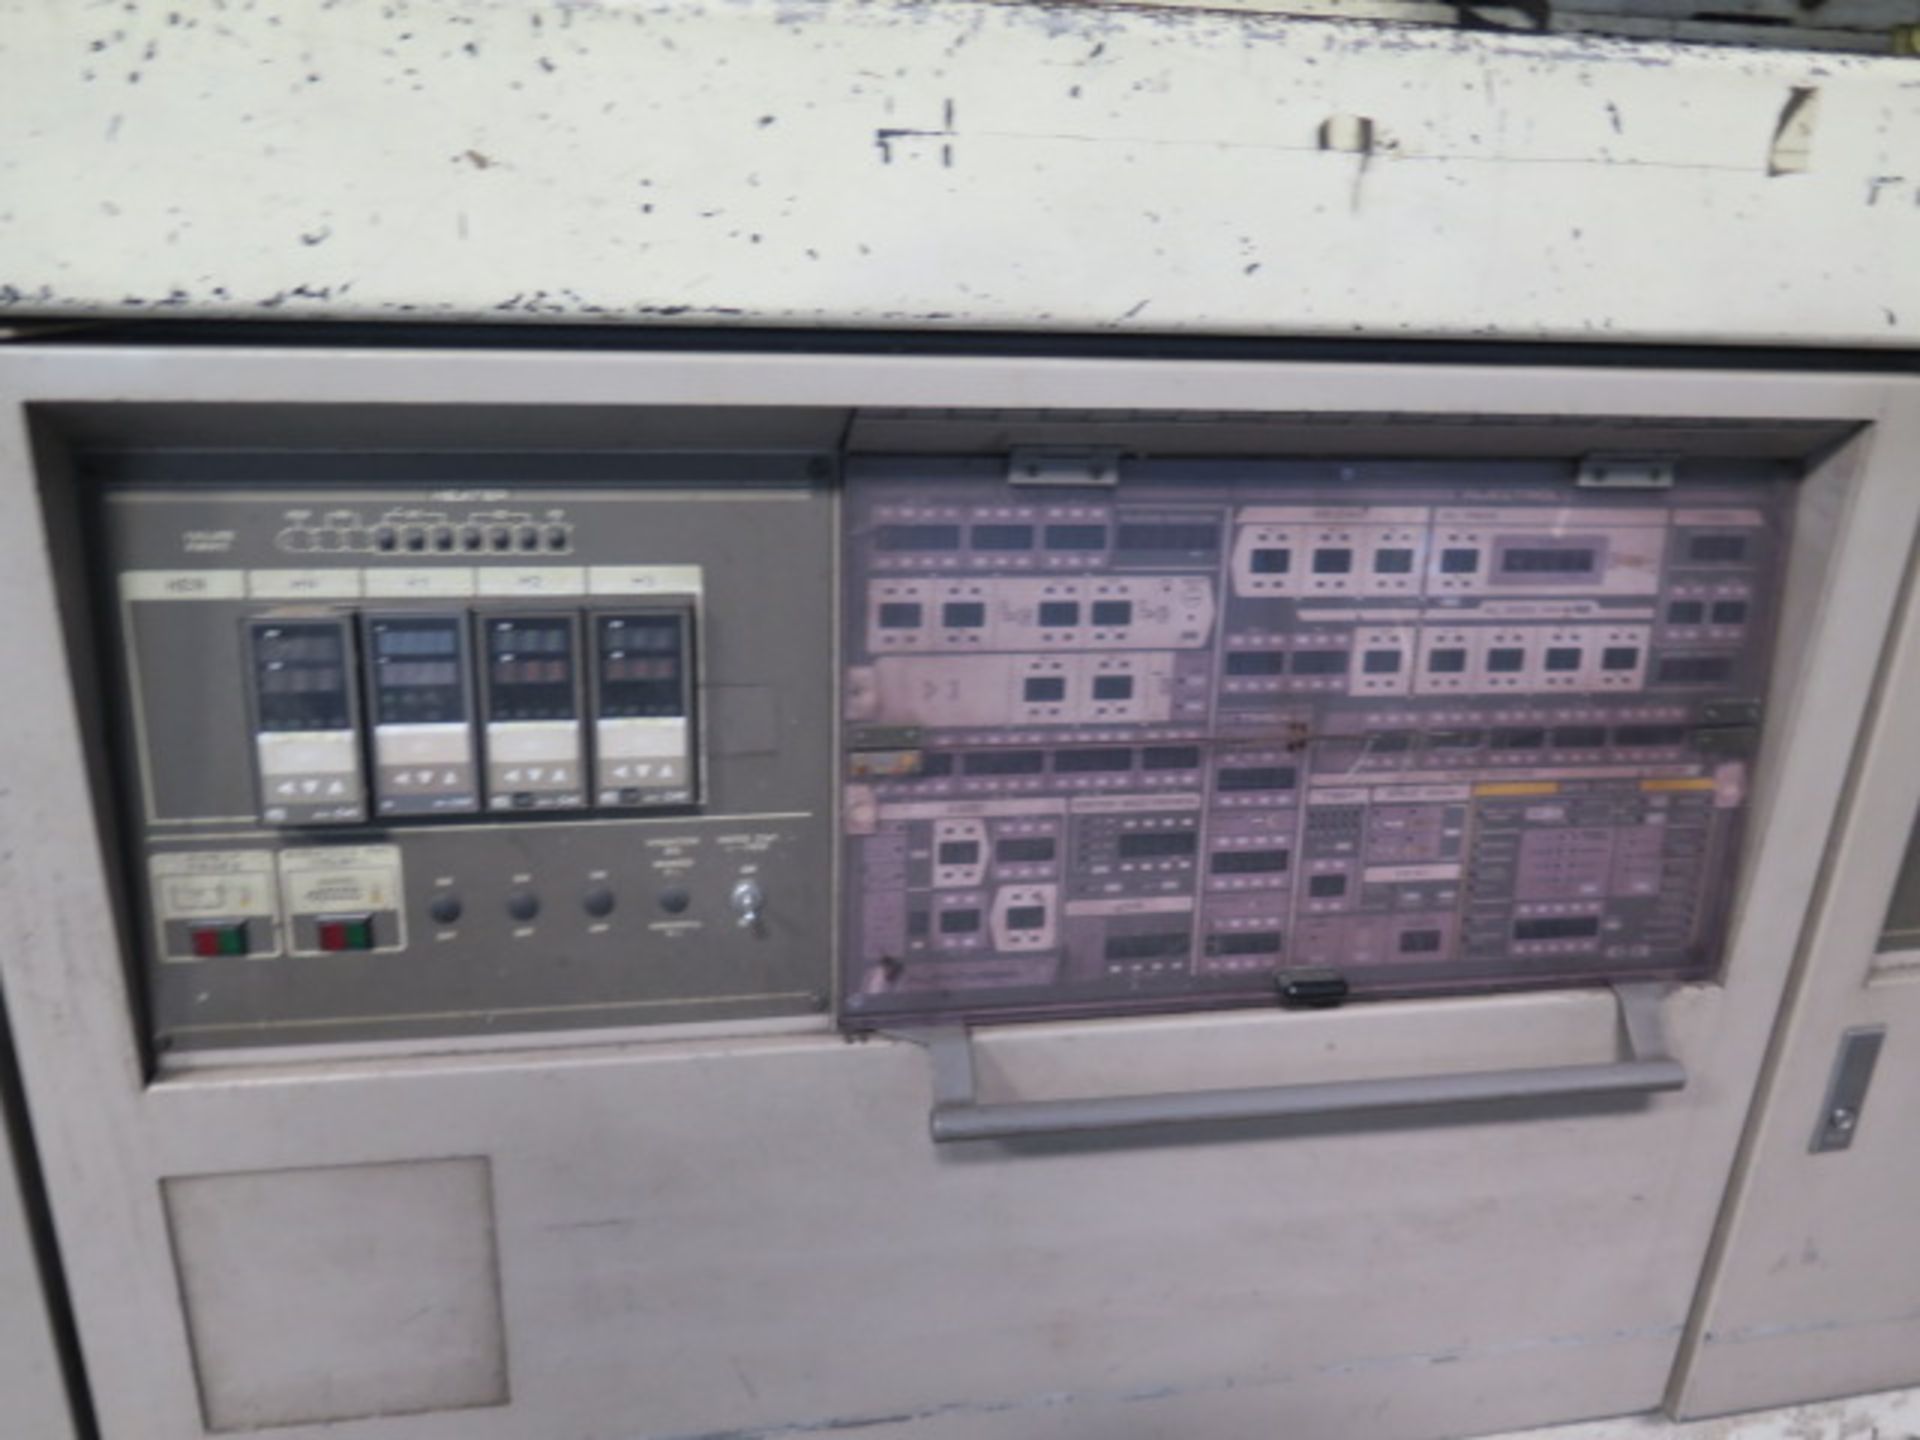 1994 Toshiba ISF150C II-5B 150 Ton Plastic Injec Molding s/n 480710 w/ Toshiba Controls, SOLD AS IS - Image 13 of 18